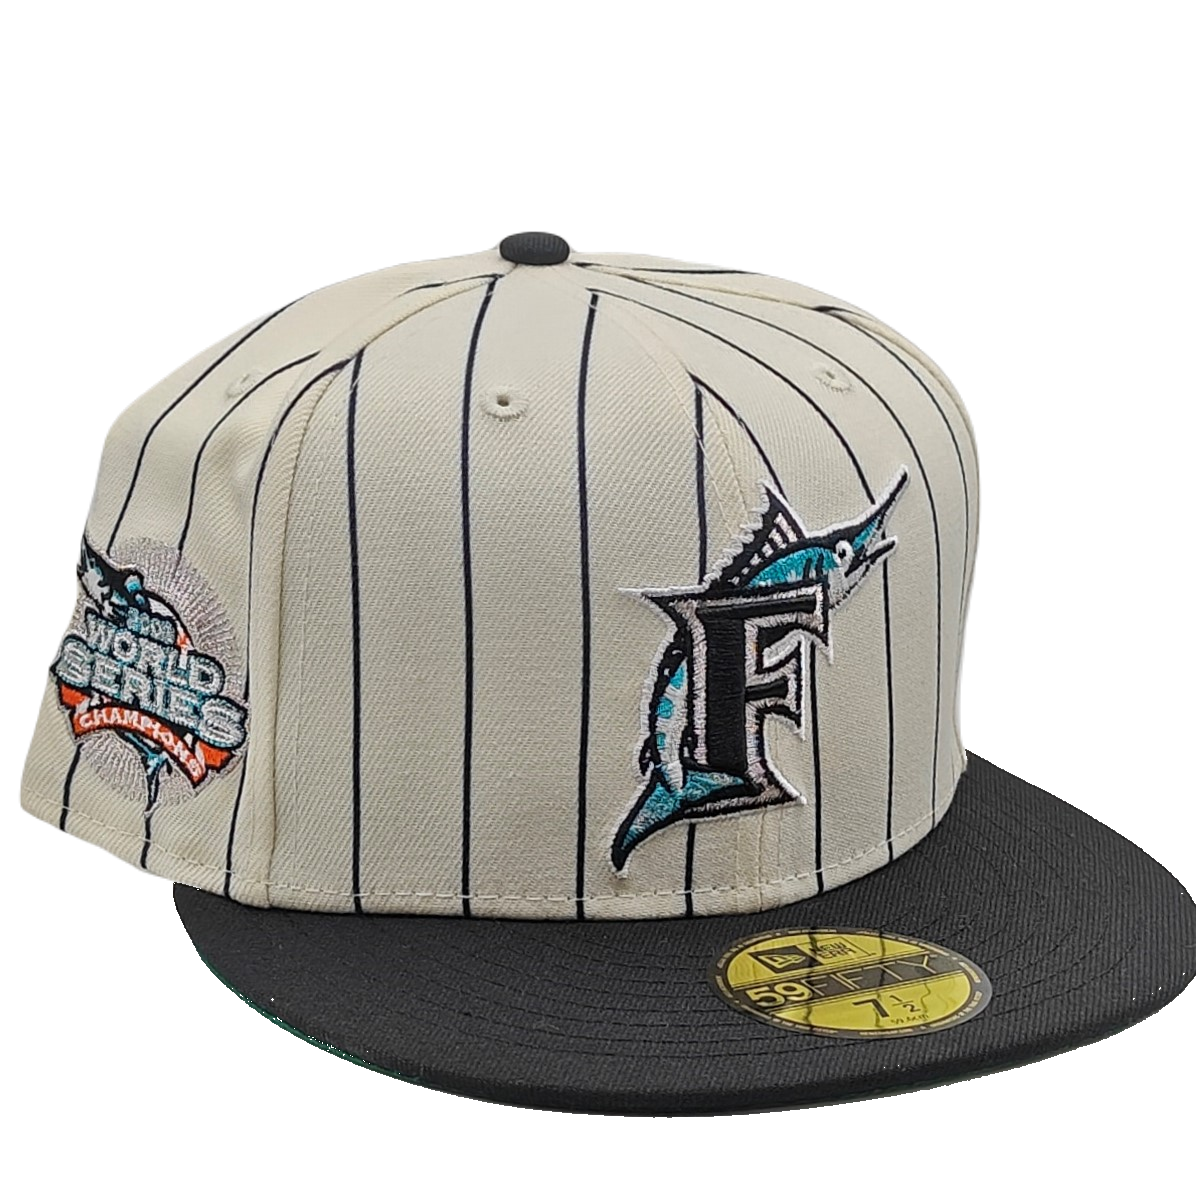 New Era Mens MLB Florida Marlins 2003 World Series Champions 59FIFTY Fitted Hat 70733679 Island Green, Peach Undervisor 8